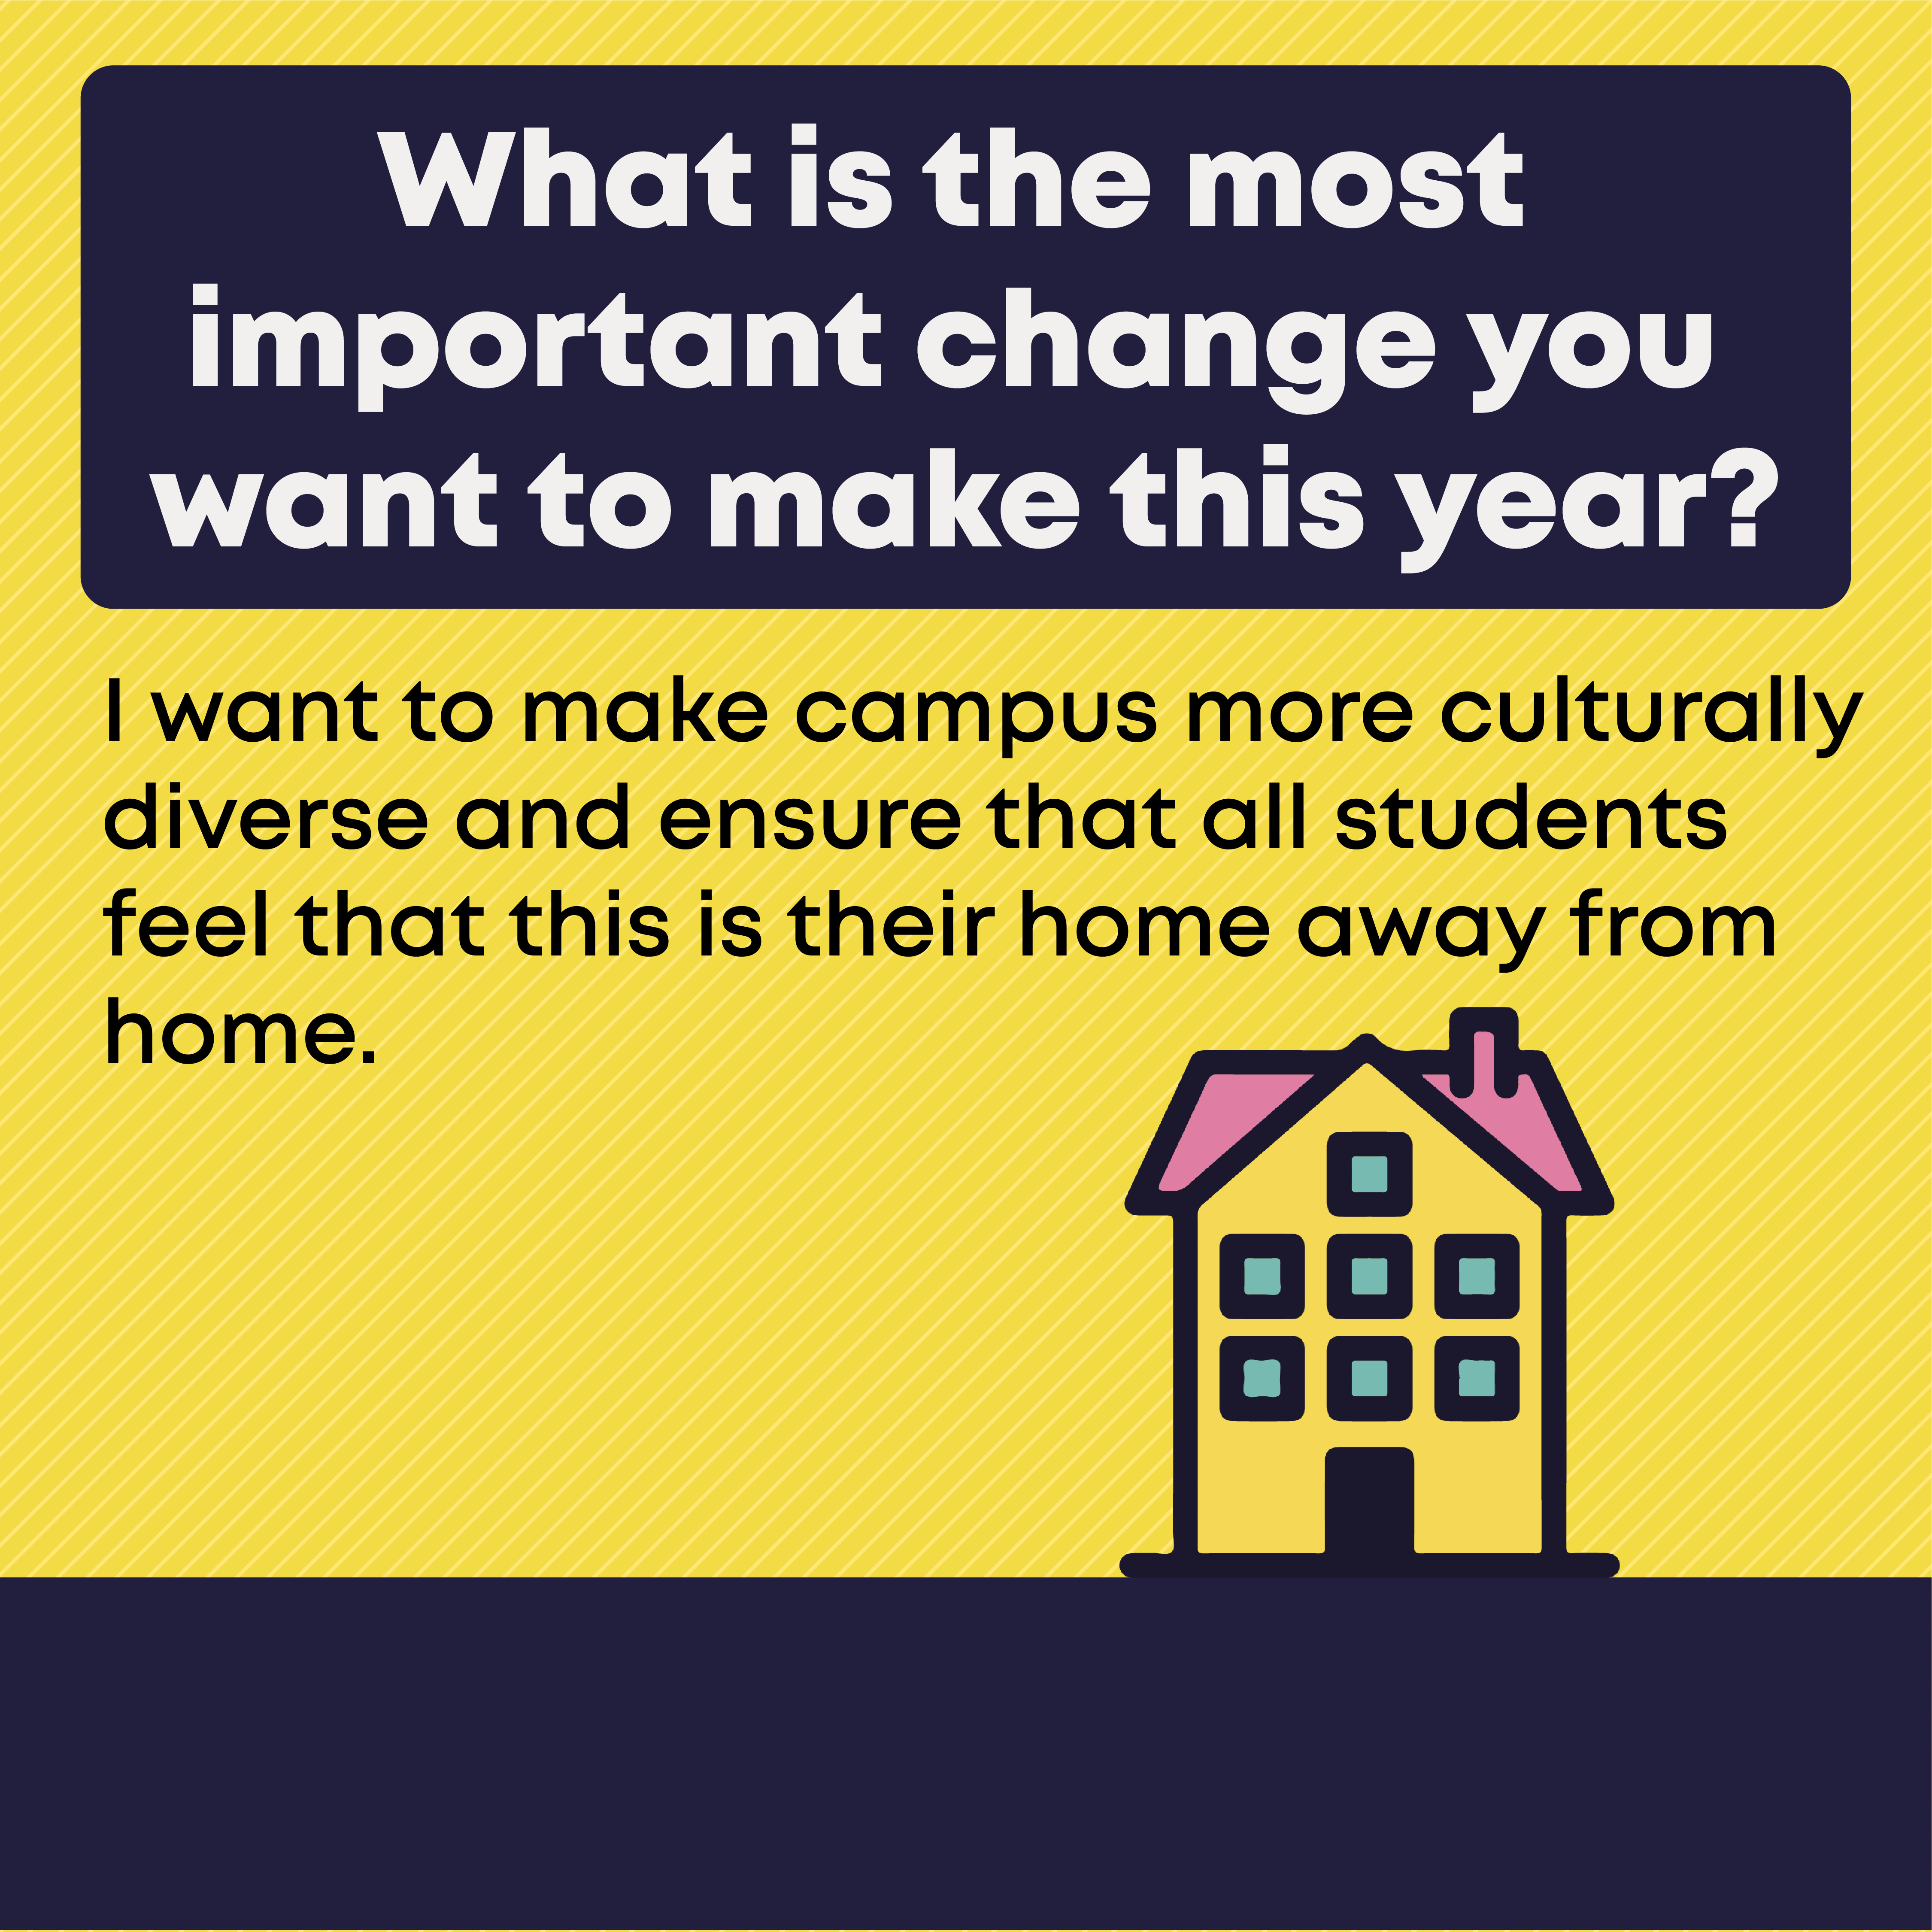 4.	What is the most important change you want to make this year?  I want to make campus more culturally diverse and ensure that all students feel that this is their home away from home.